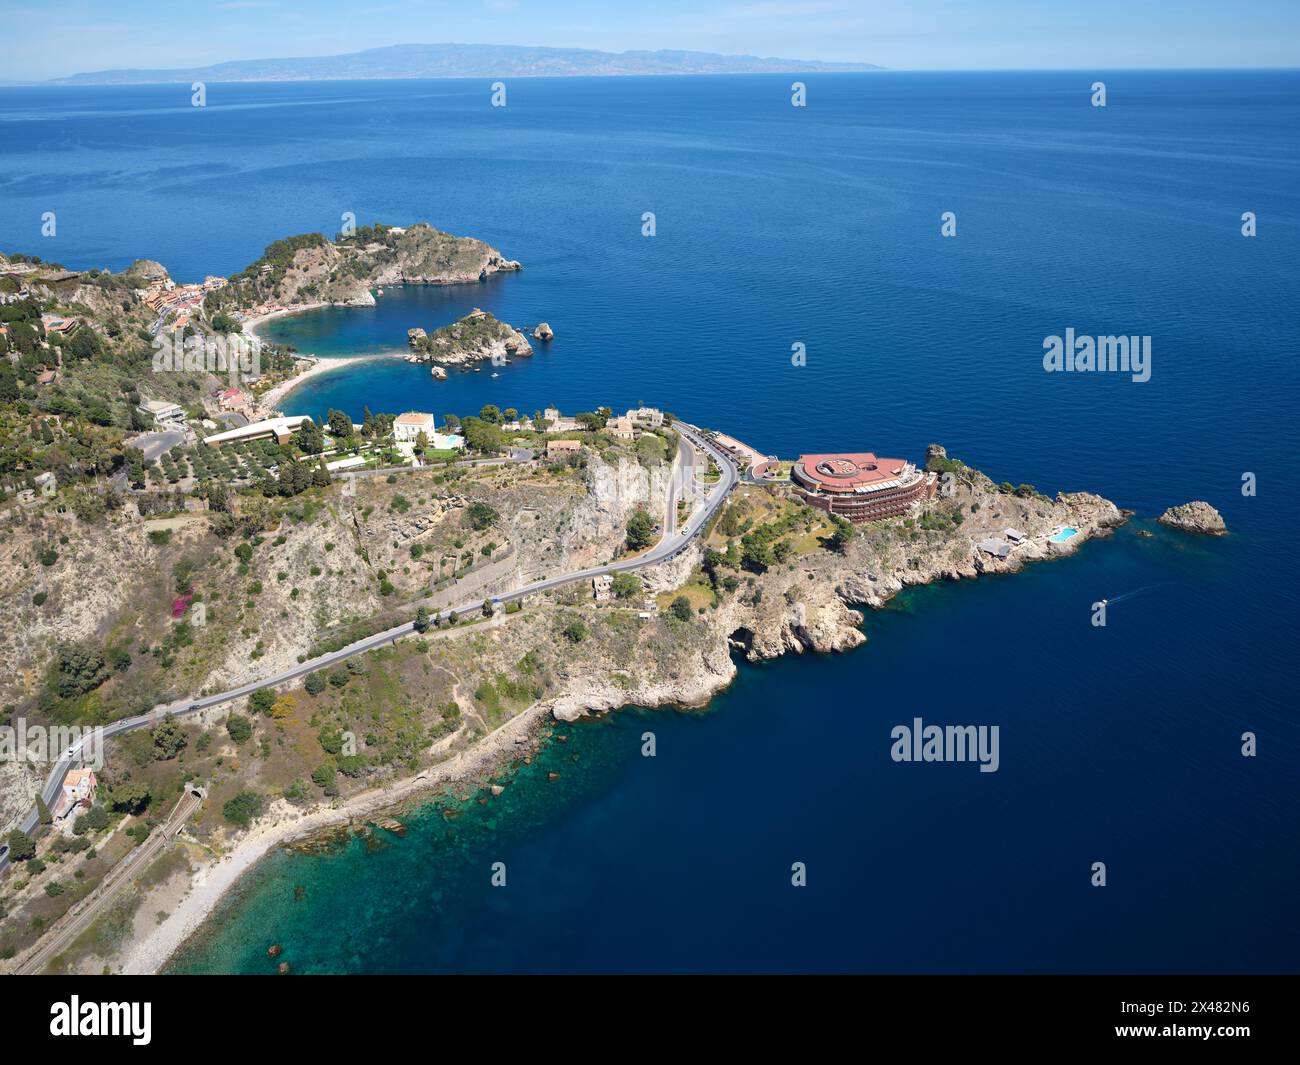 AERIAL VIEW. The rocky promontories of Taormina jutting out into the Ionian Sea. Metropolitan City of Messina, Sicily, Italy. Stock Photo